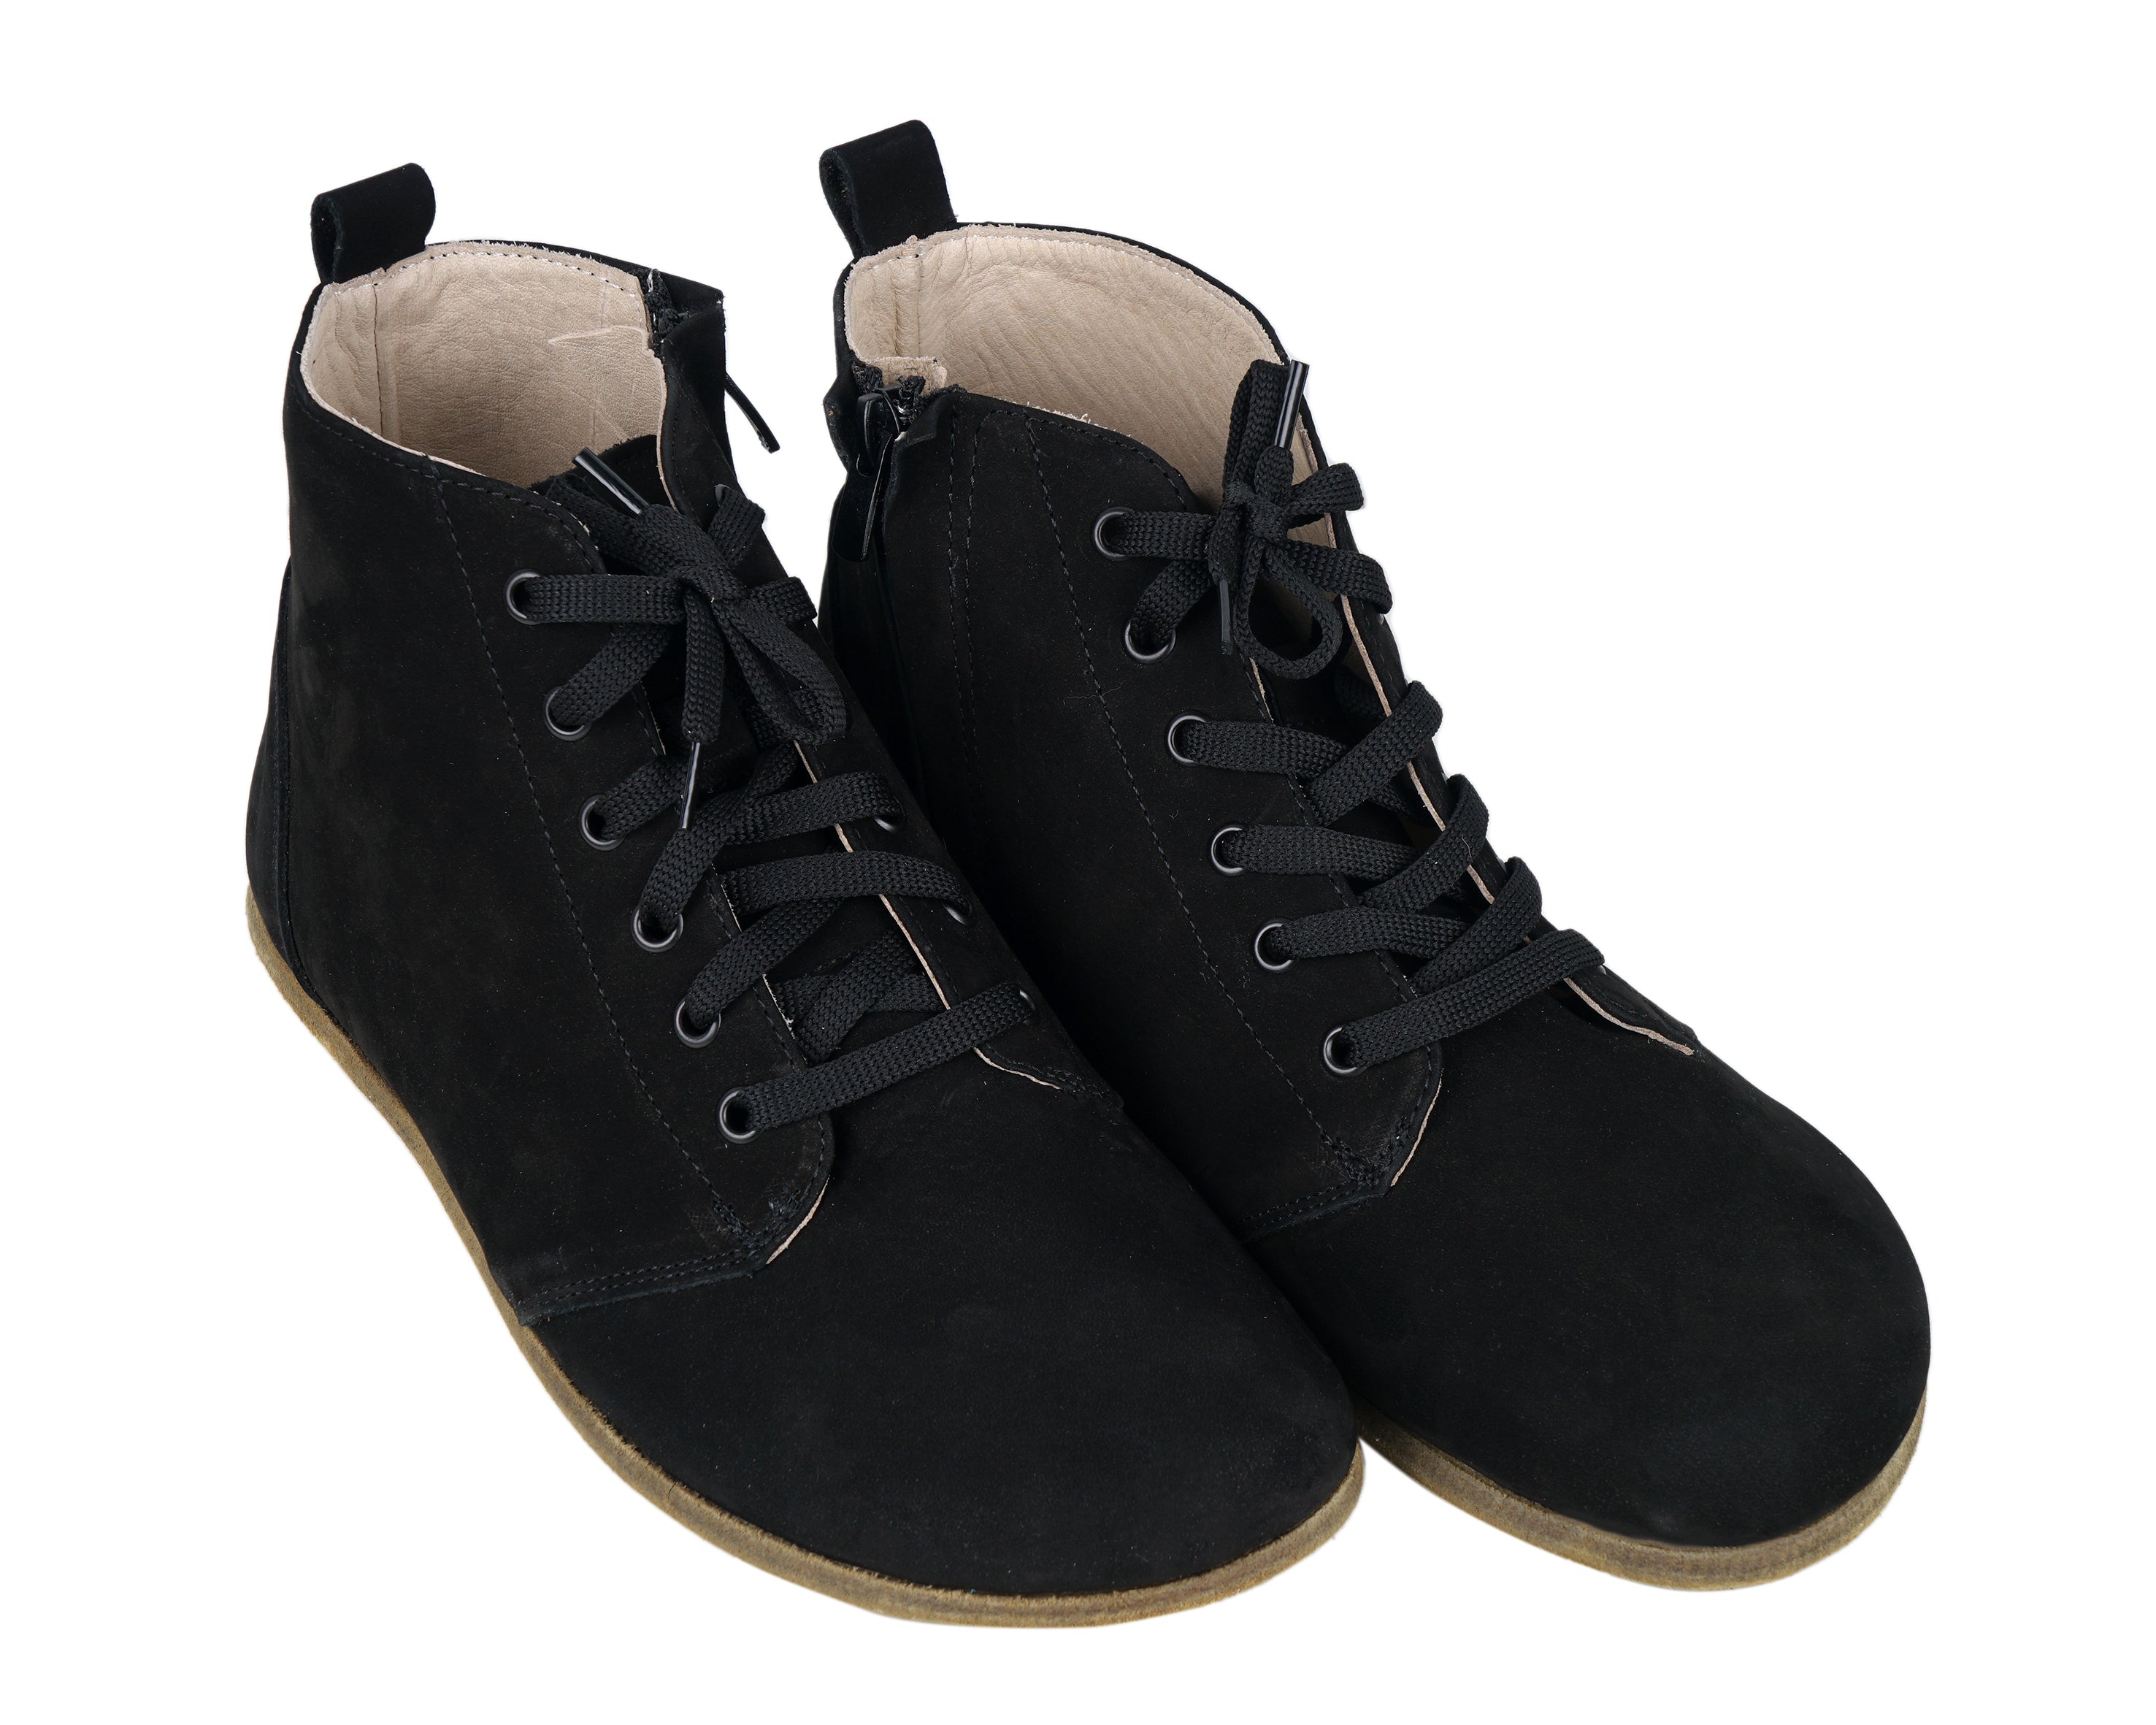 Black Short Boots Wide Barefoot Nubuck Leather Handmade Shoes